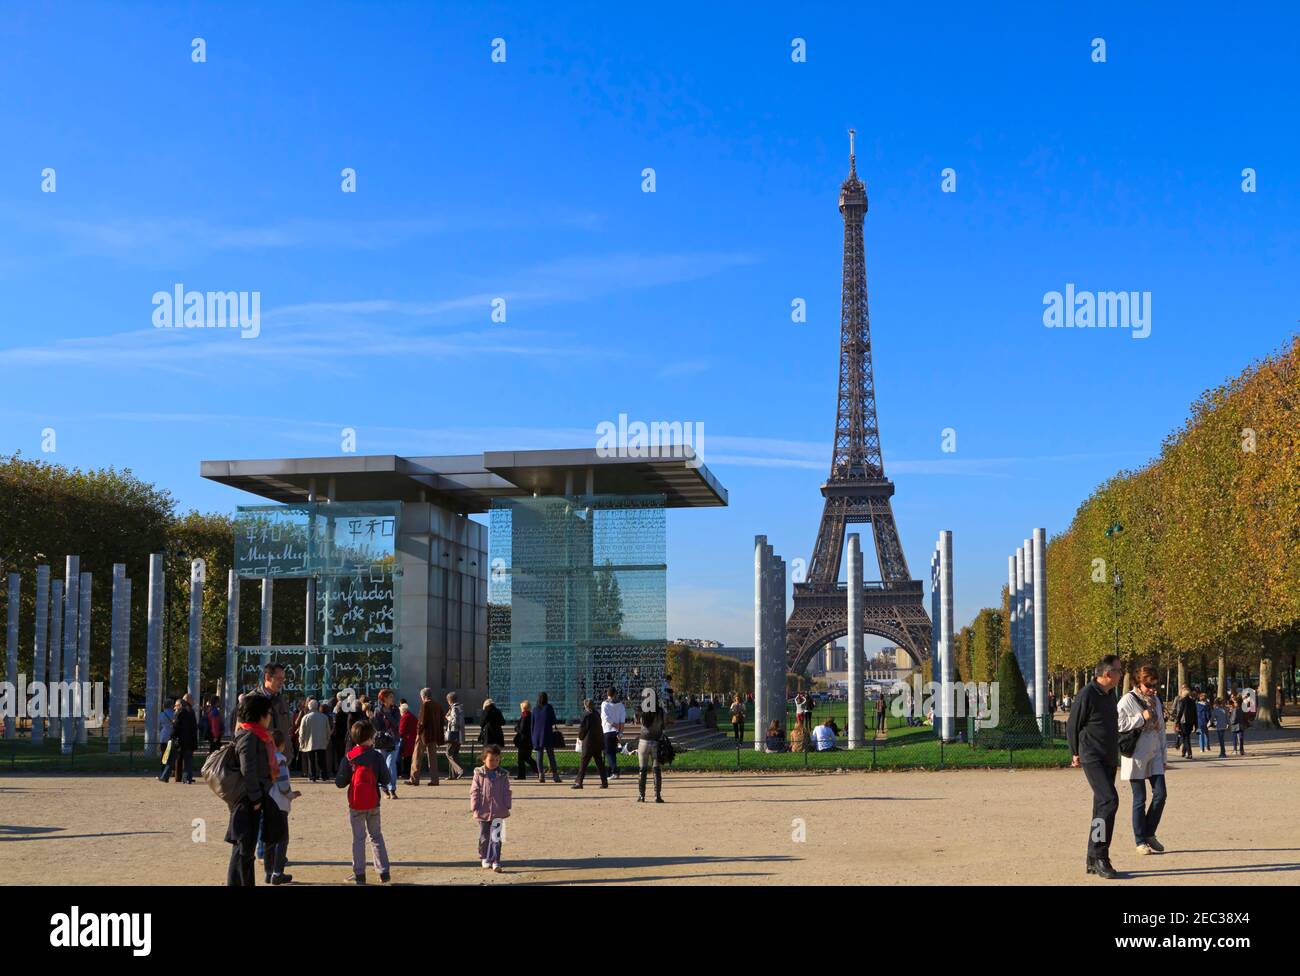 Wall for Peace, Champ de Mars, Paris, France. Modern sculpture installation by artist Clara Halter and architect Jean-Michel Wilmotte. Stock Photo